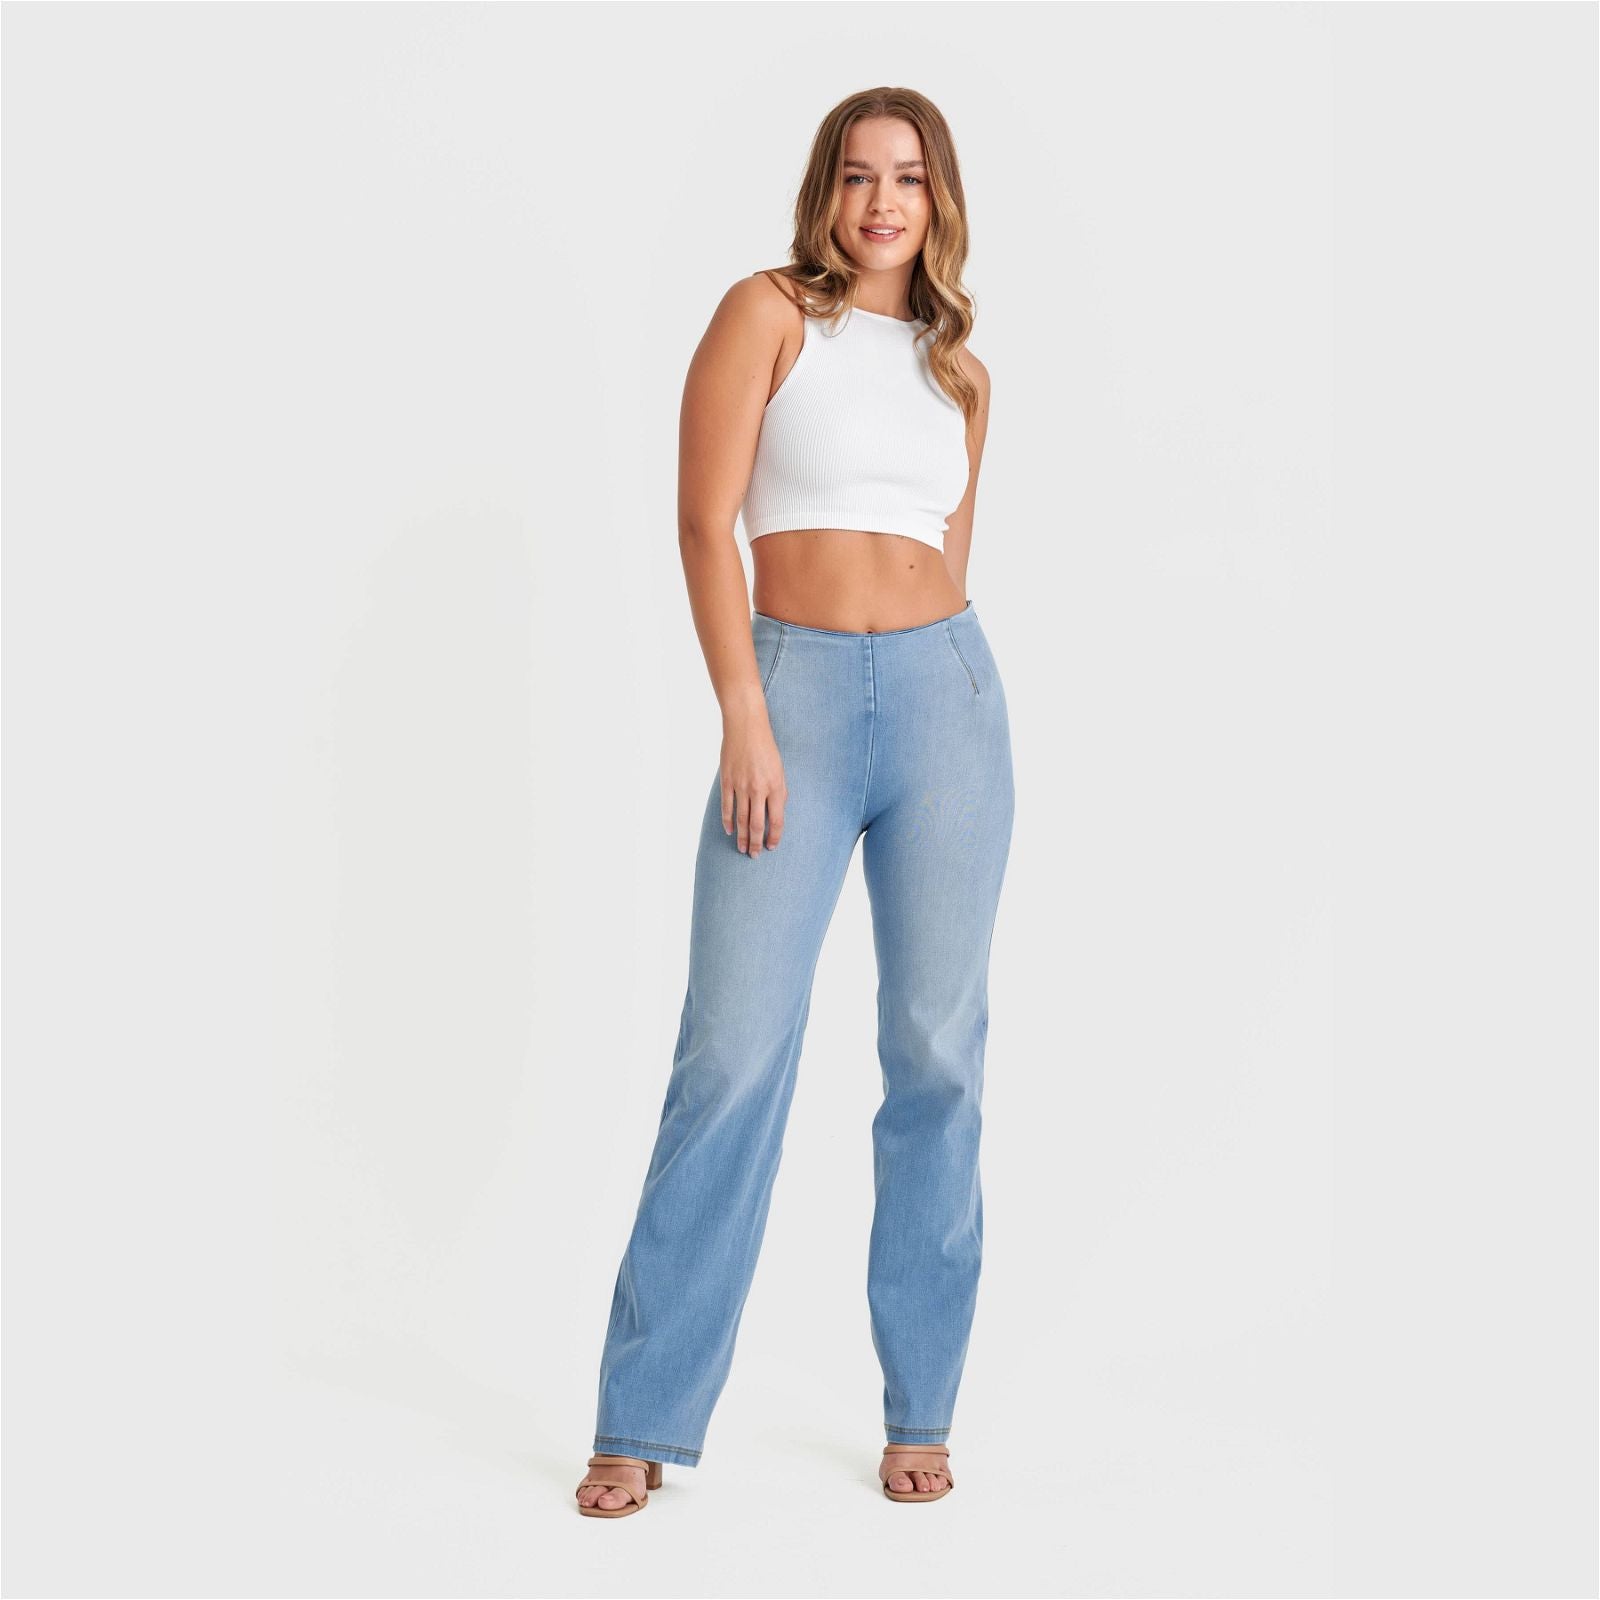 WR.UP® SNUG Jeans - High Waisted - Flare - Light Blue + Yellow Stitching 1